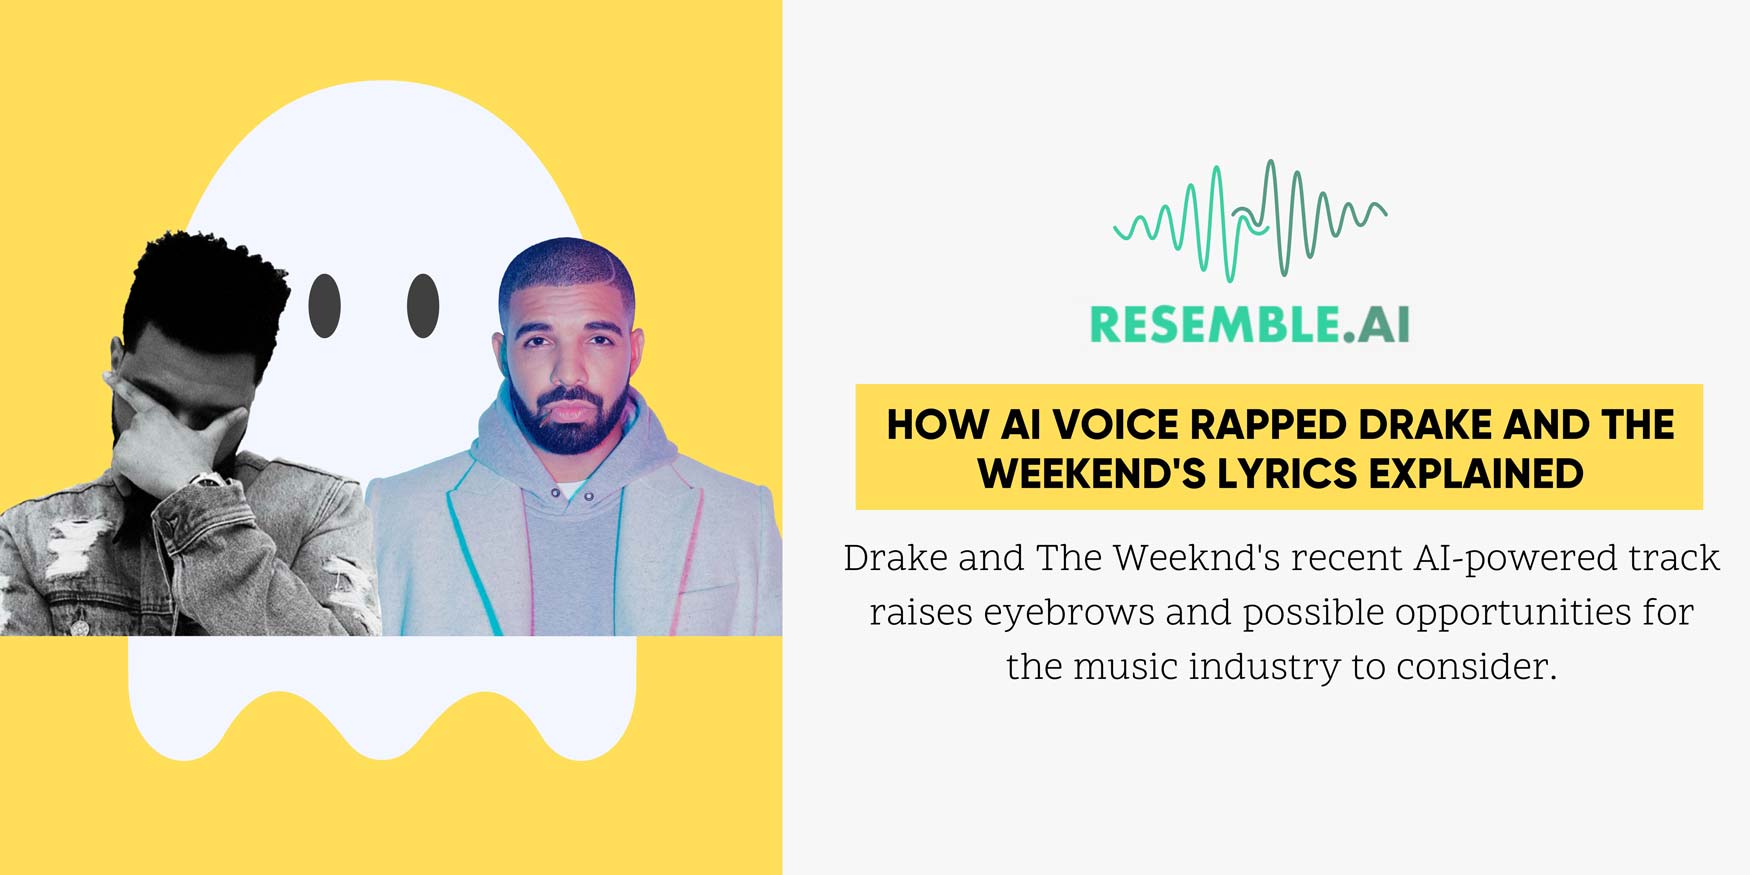 How AI Voice Rapped Drake's and Weekend's Lyrics Explained